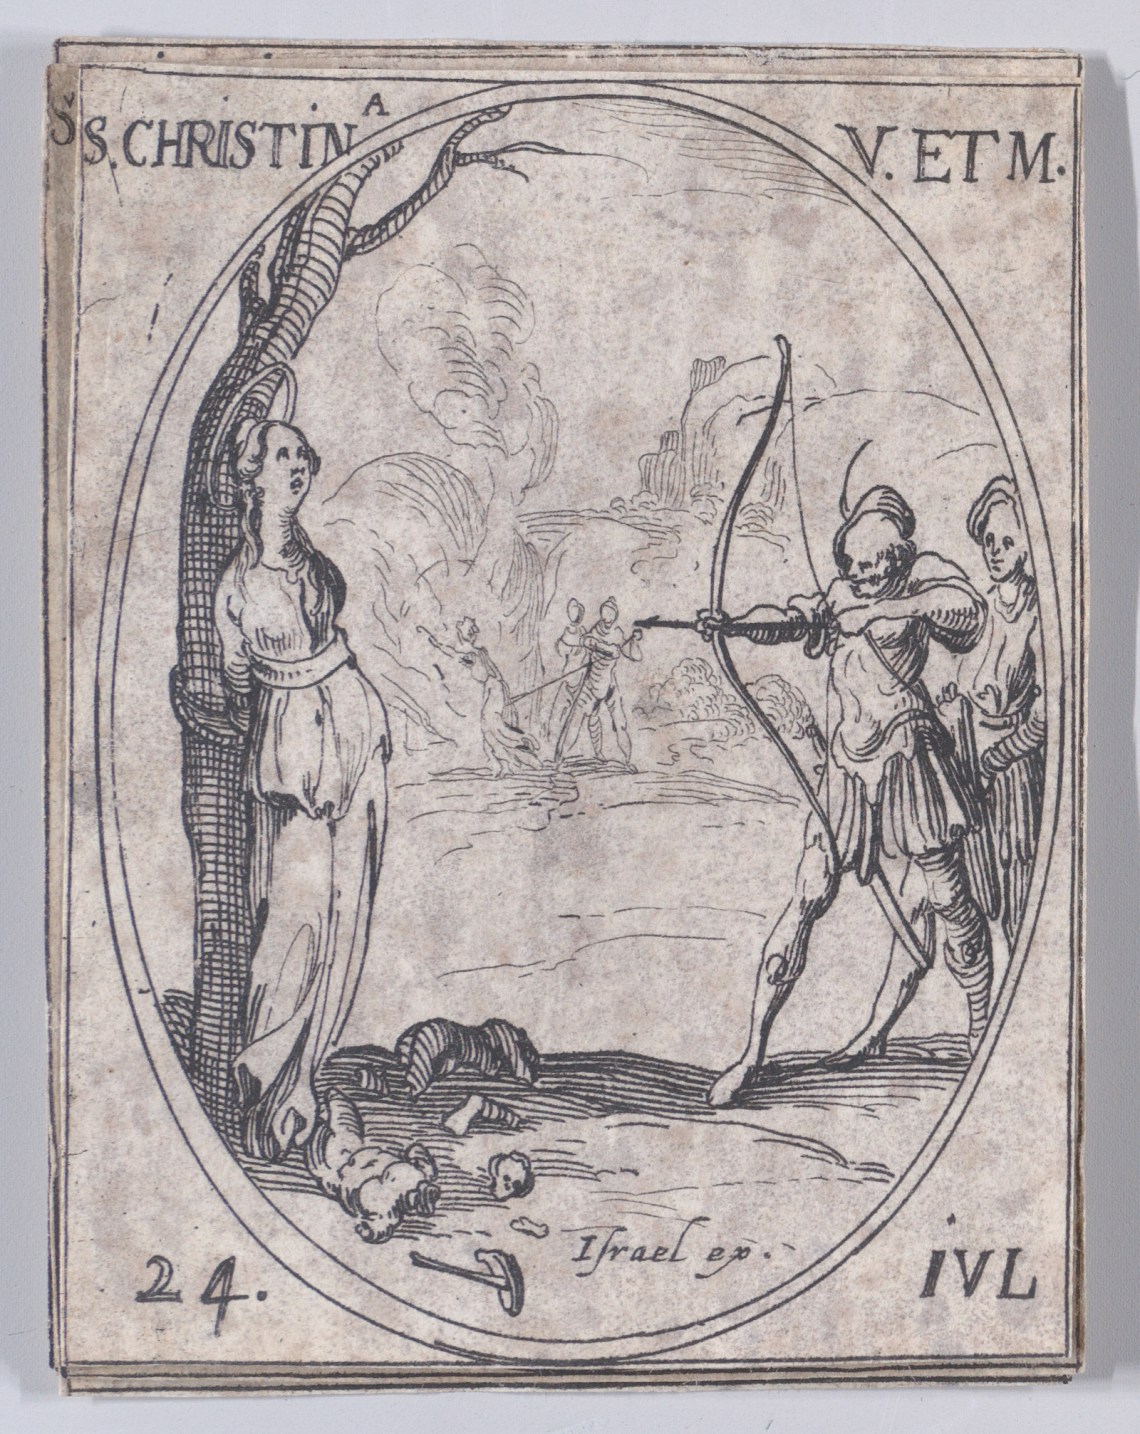 An engraving of a woman tied to a tree about to be shot with an arrow